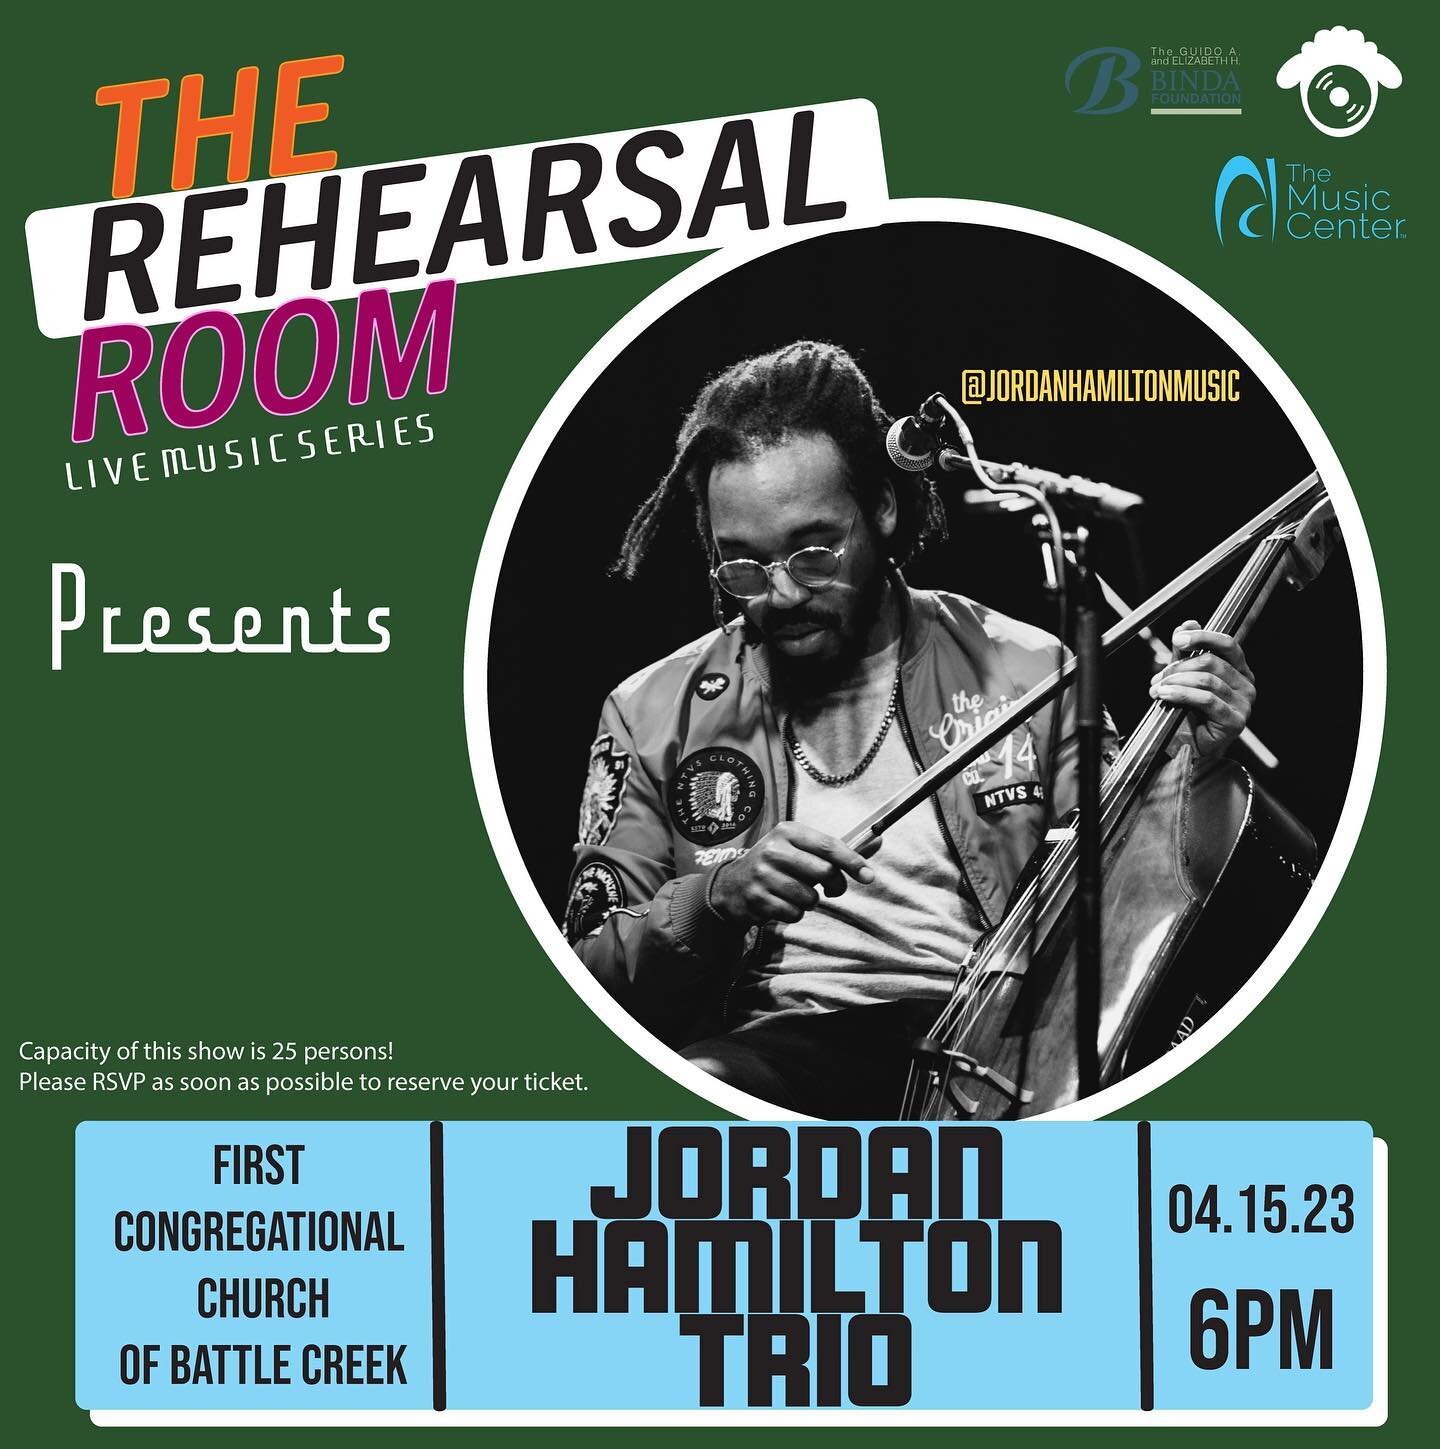 🍃Join us April 15 @ 6p for the recording of our SEASON FINALE! The fifth episode of the Rehearsal Room featuring 
@jordanhamiltonmusic ! This intimate show is one you absolutely cannot miss! 

This event has an exclusive capacity of 25 folks so plea